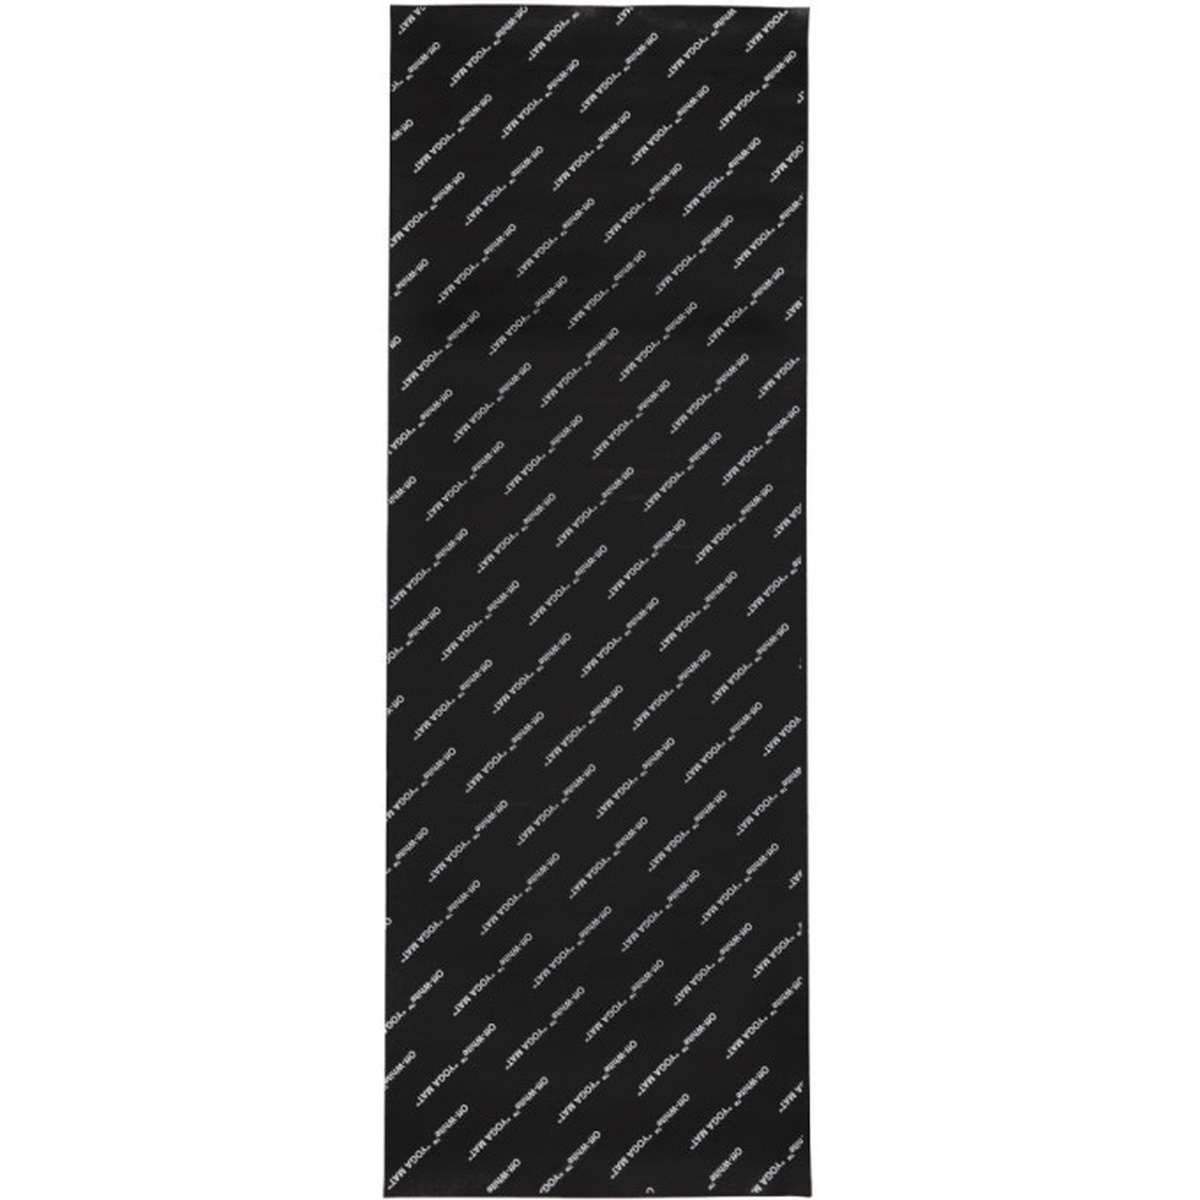 Off-White Black and White Woman Yoga Mat